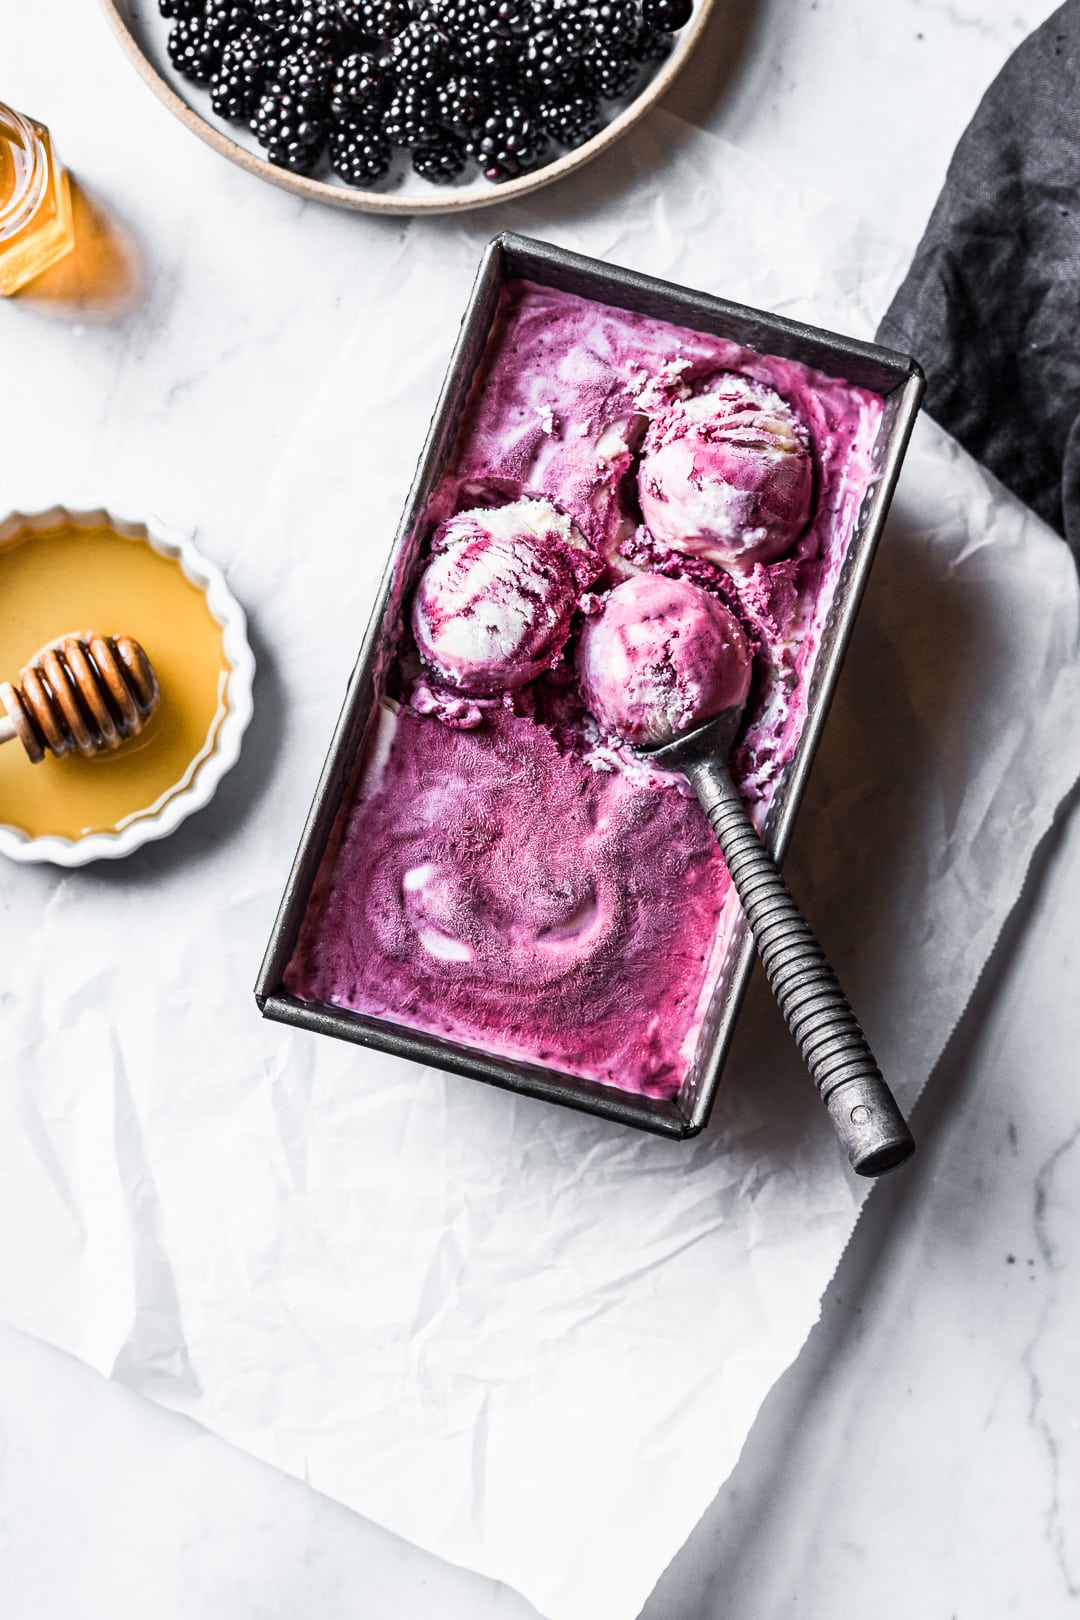 Three scoops of purple ice cream in container on a marble background with honey and blackberries nearby